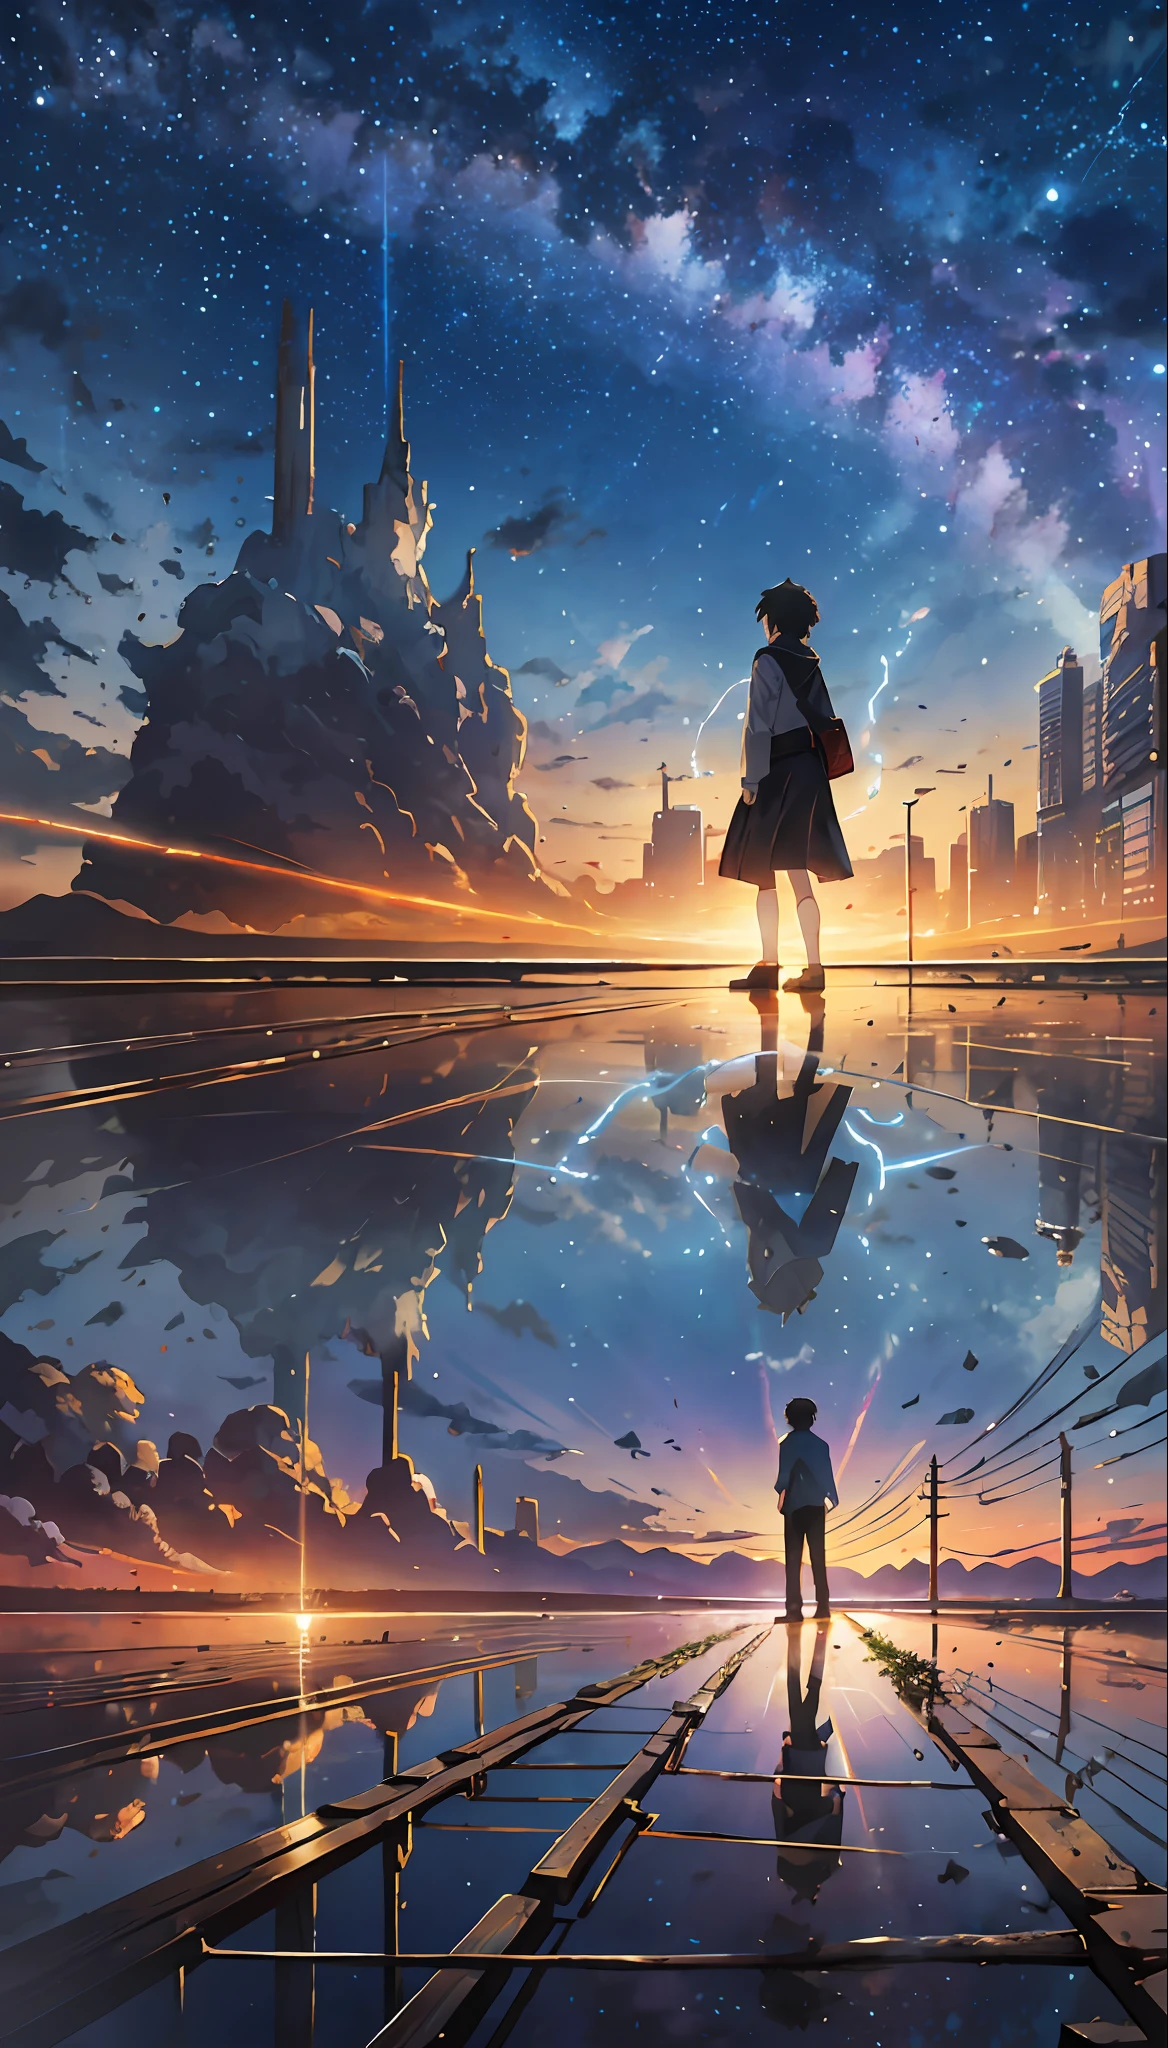 eldritch horror prophecy, creatures, lightning from skies, lava from ground, a figure of man standing in front, masterpiece, through bodies of water on tracks, bright starry sky. Romantic train, Makoto Shinkai's picture, pixiv, concept art, lofi art style, reflection. by Makoto Shinkai, lofi art, Beautiful anime scene, Anime landscape, detailed scenery —width 672, in style of Makoto shinkai, style of Makoto shinkai, enhanced details.